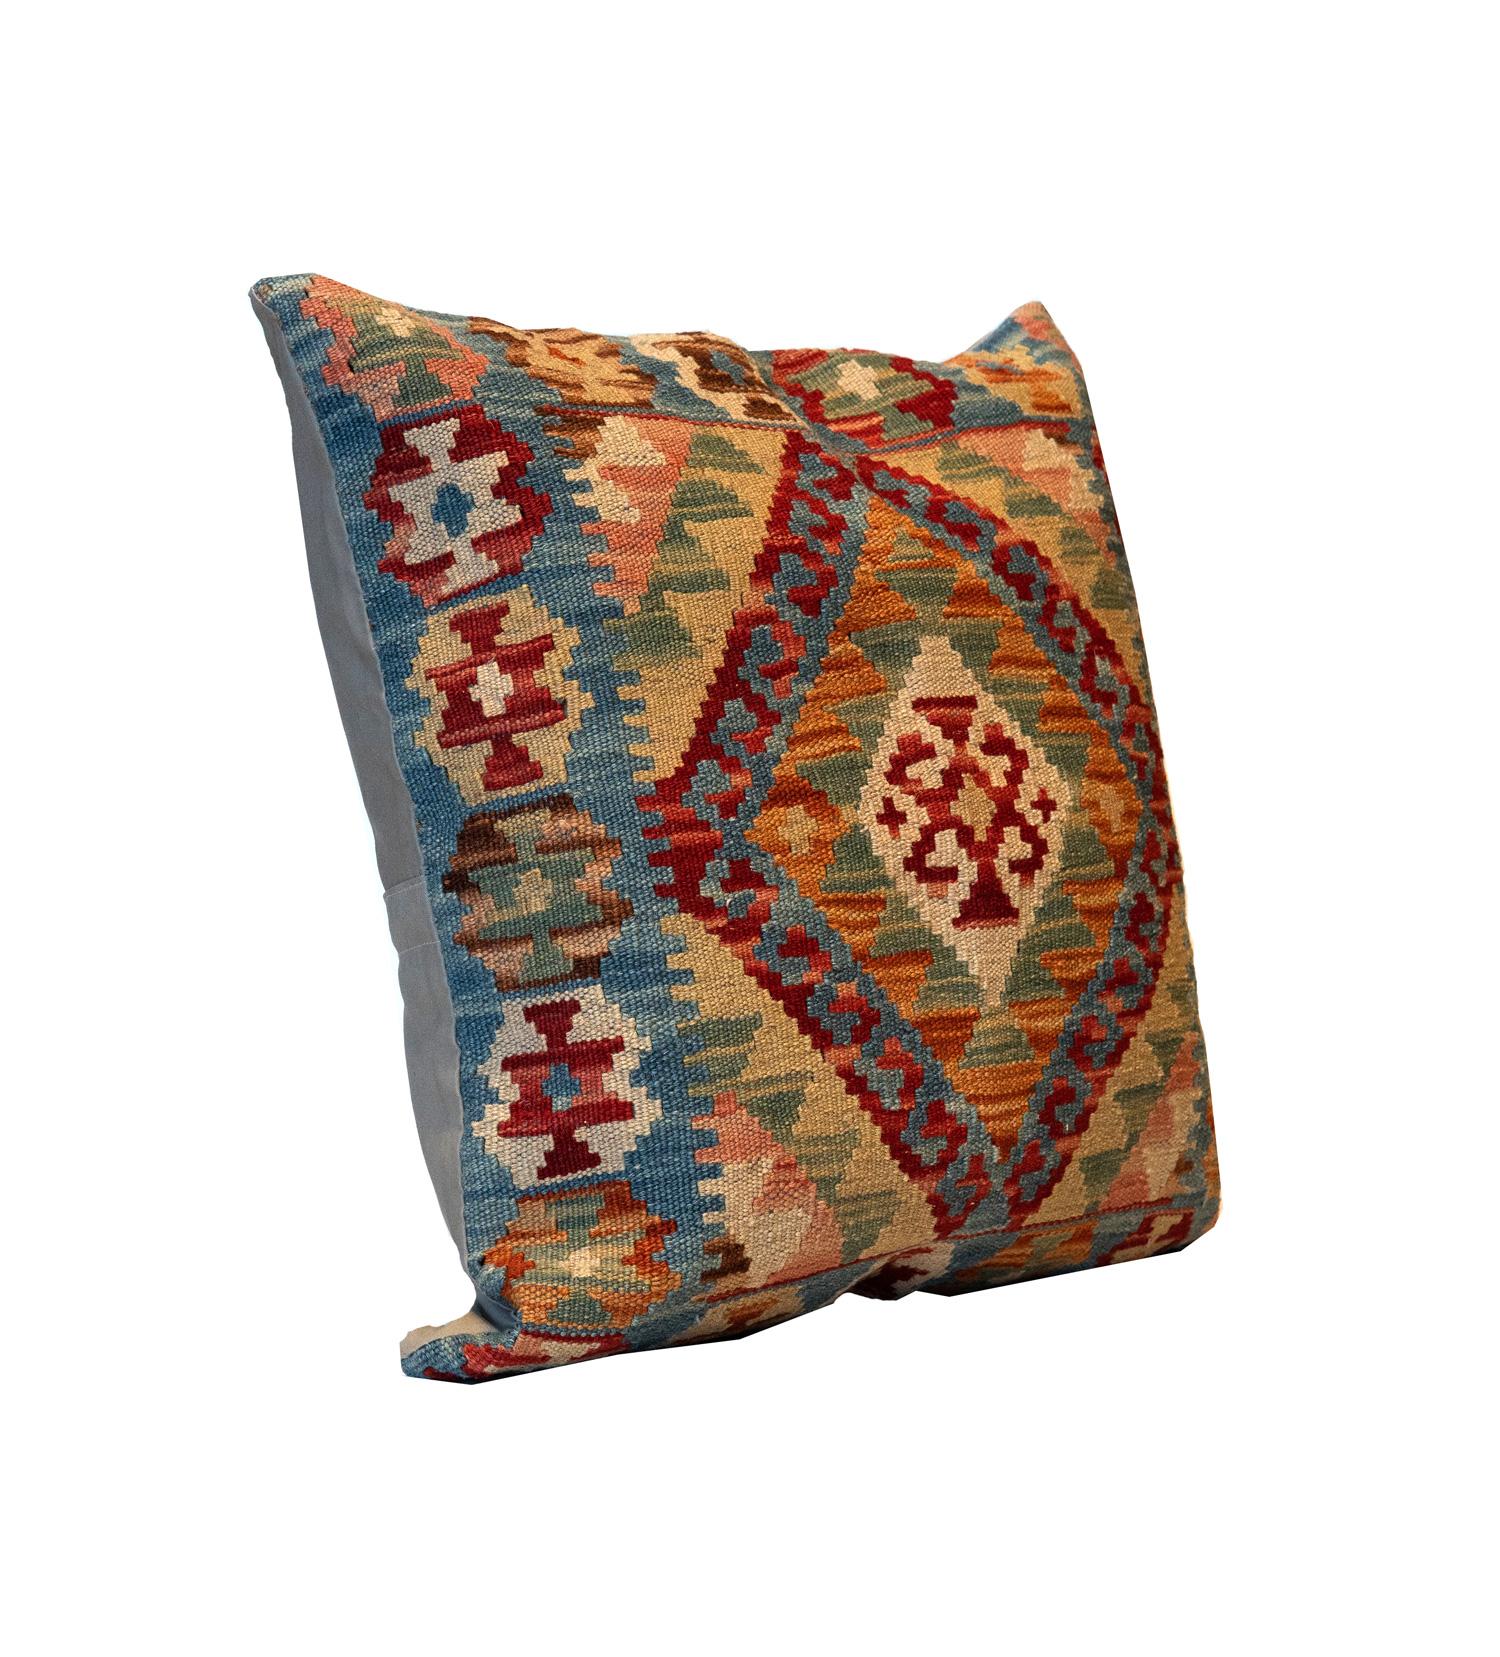 This fantastic cushion has been woven by hand using traditional kilim weaving techniques with hand-spun wool. They featured asymmetrical geometric patterns woven in beautiful rustic colours, including olive green, cream, rust orange, red and blue.